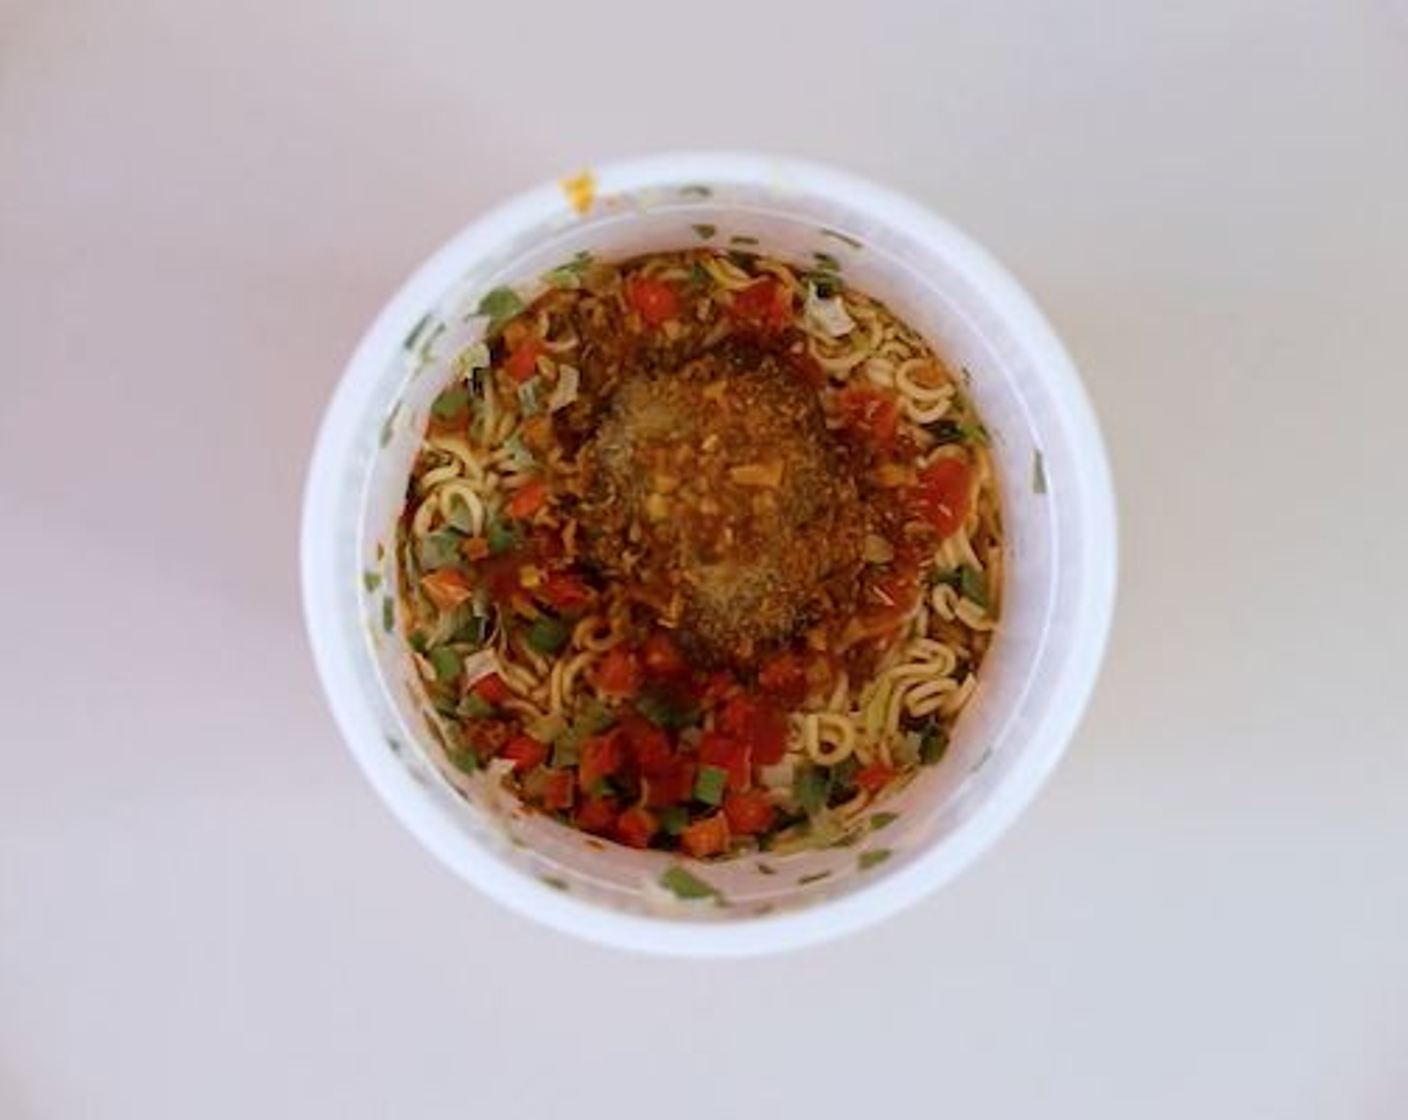 step 3 Open up your Instant Noodles (1 pckg) and add the included seasoning pack. Additionally add some Chili Sauce (1 tsp), Sesame Oil (1 tsp), Soy Sauce (1 Tbsp), Lemongrass Powder (1 tsp) and Chinese Five Spice Powder (1 tsp).